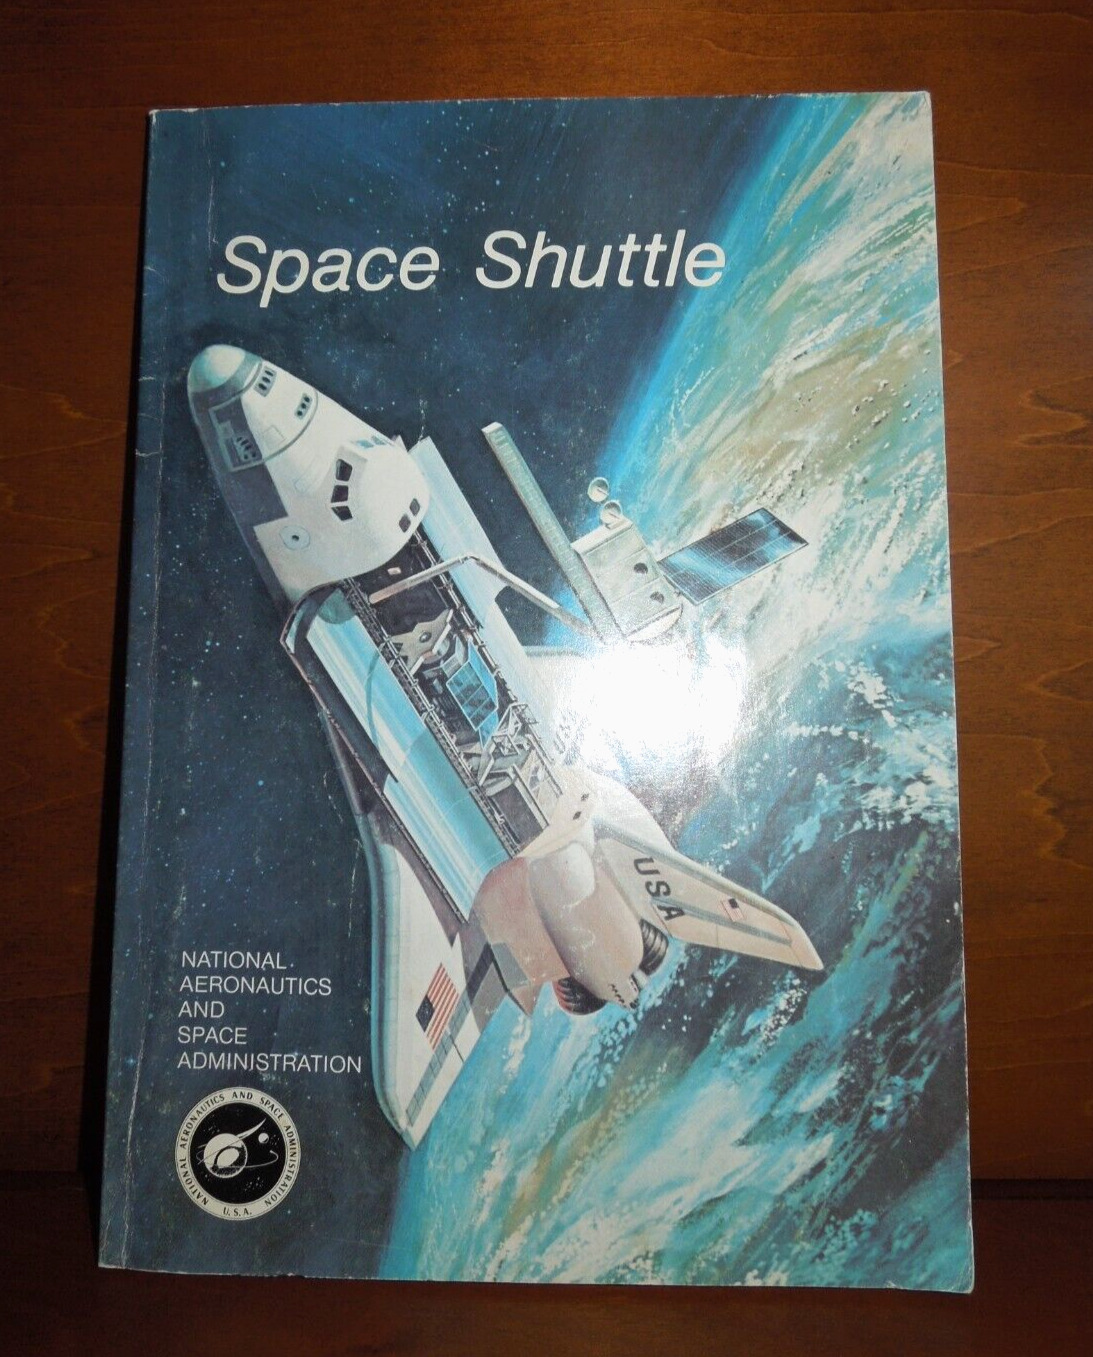 Space Shuttle Book With Leonard Nimoy, Deforest Kelly and Astronaut Signatures